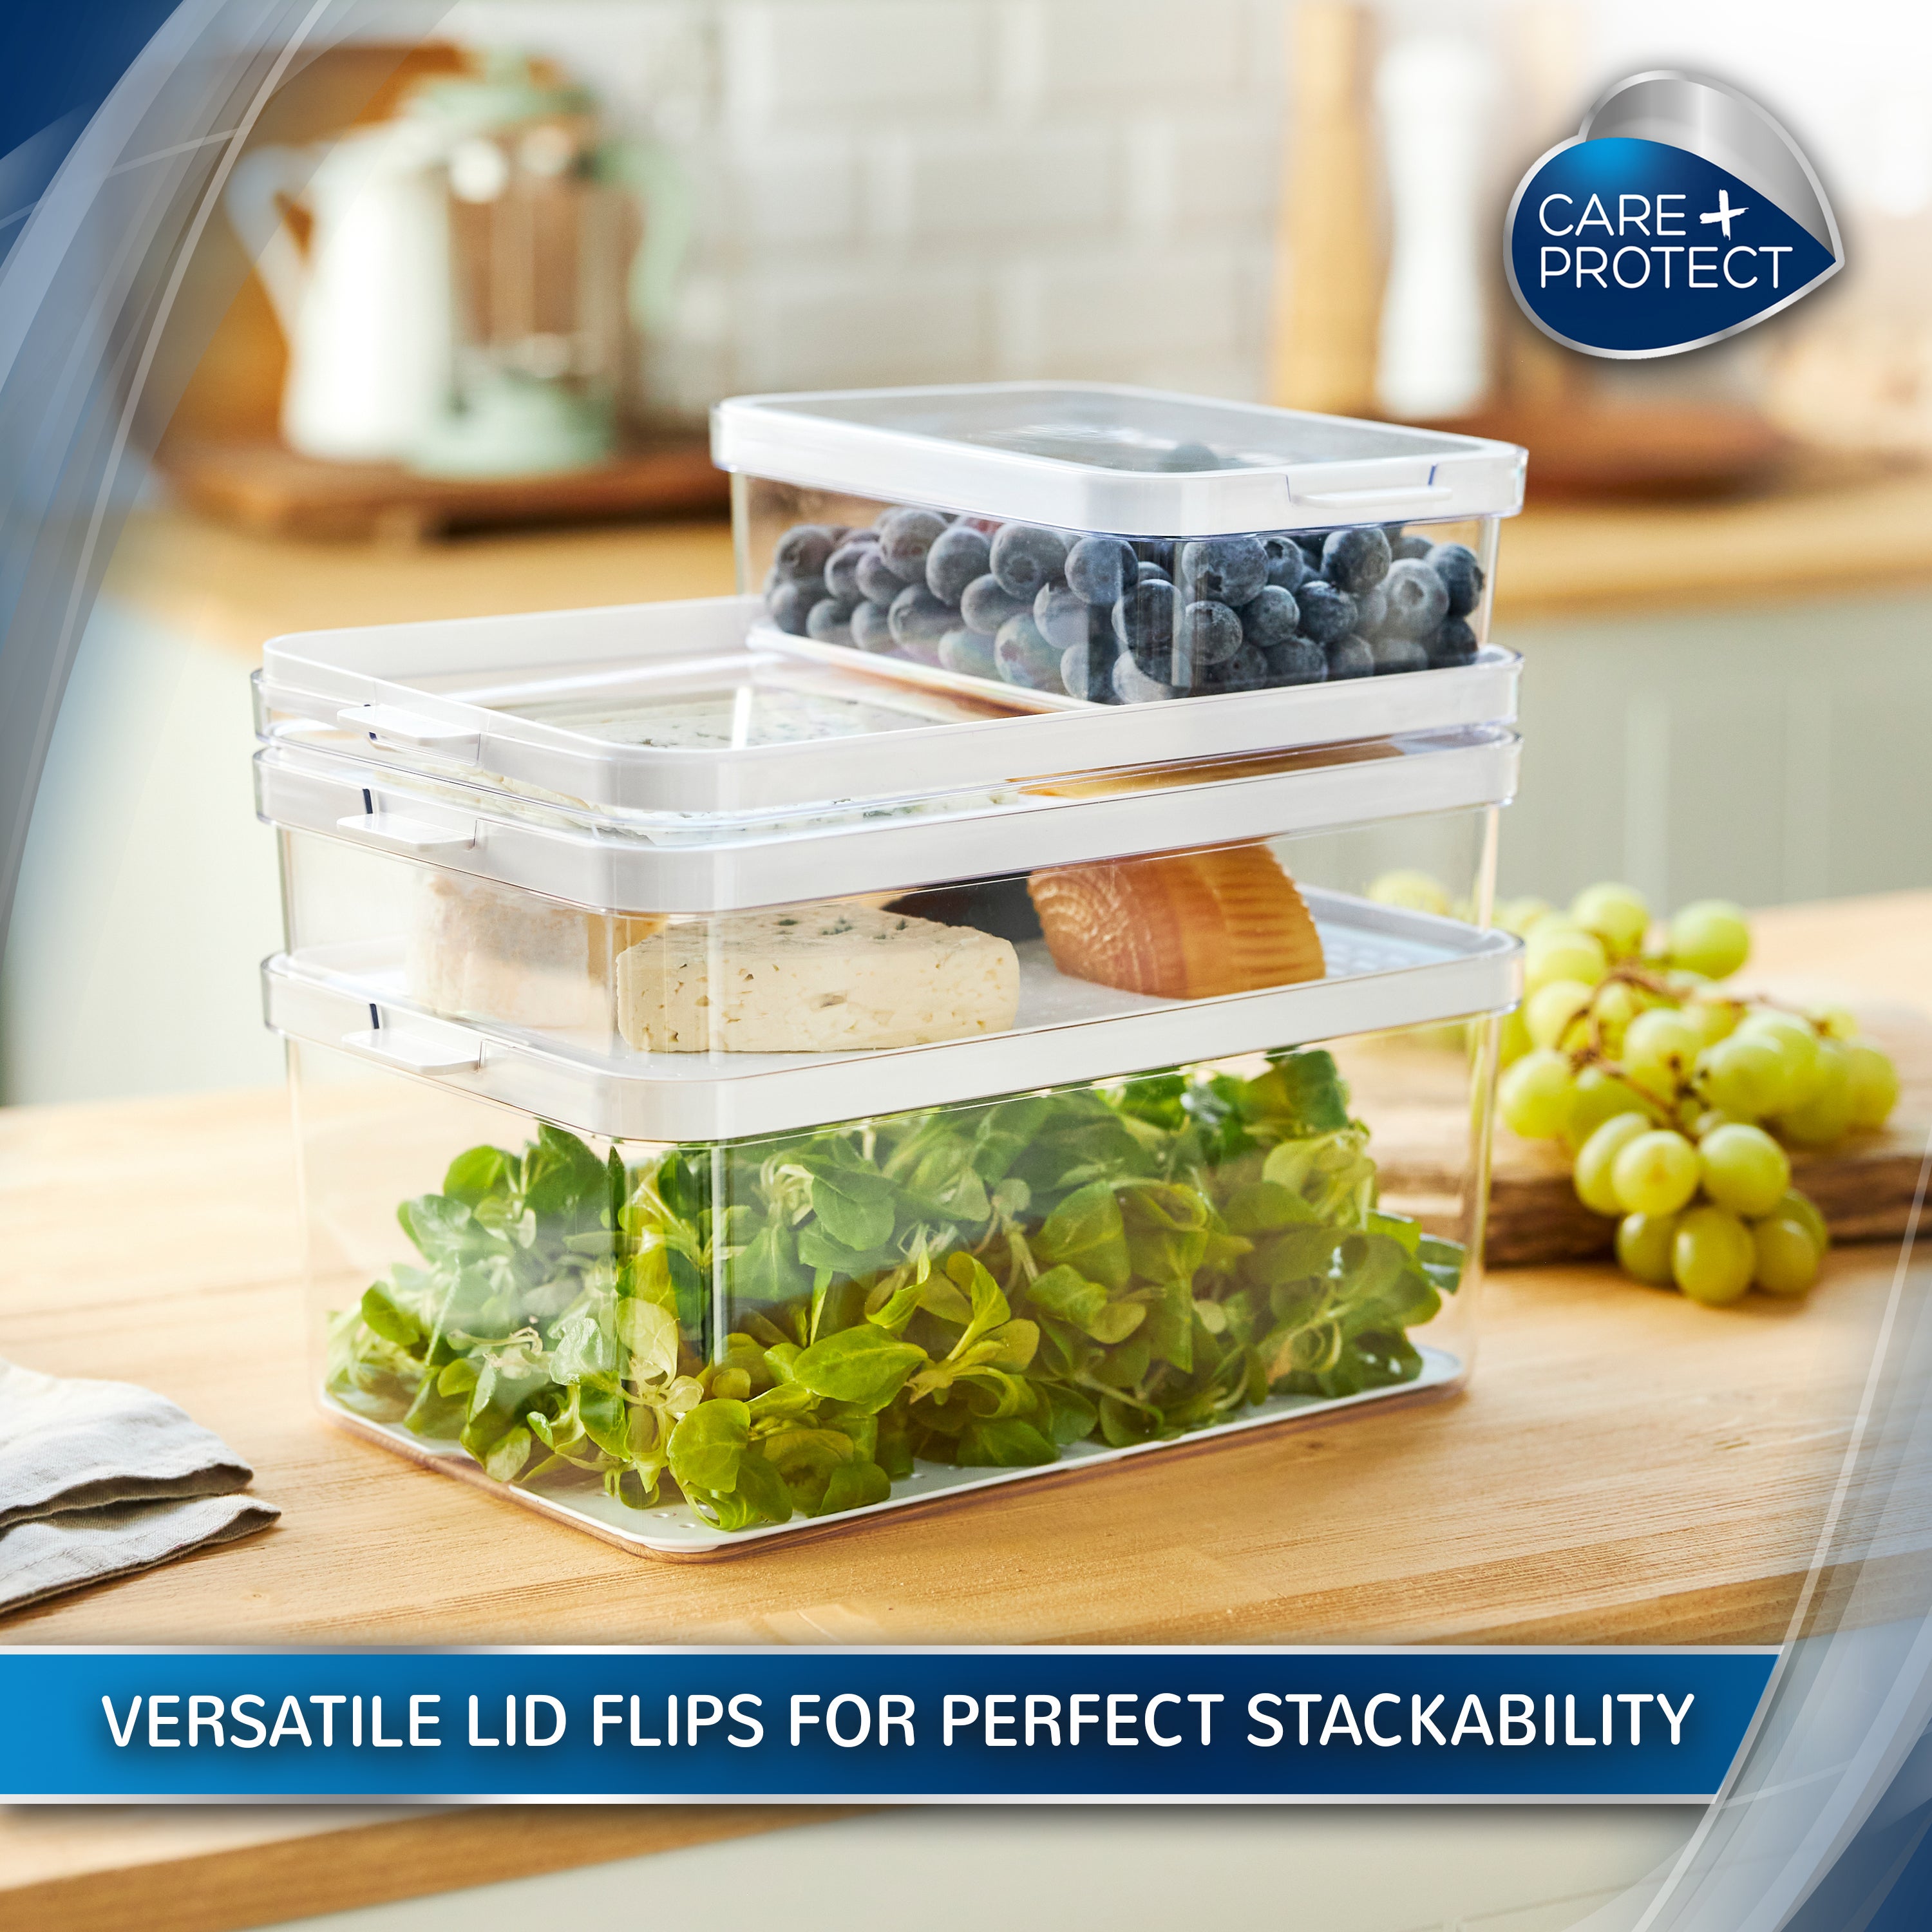 Care + Protect Food Container, 4.65L